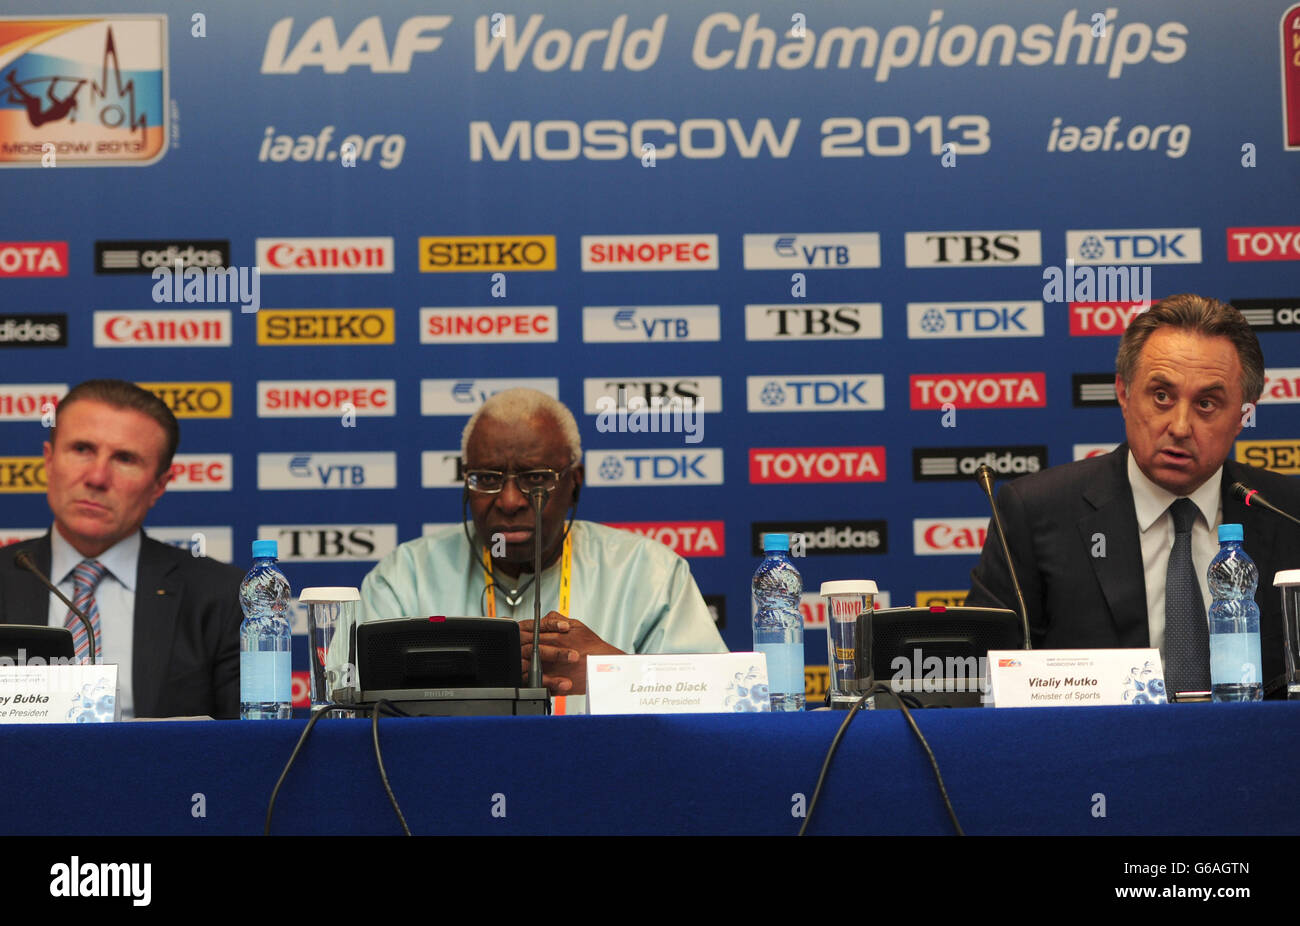 IAAF Vice-President Sergey Bubka (left), IAAF President Lamine Diack (centre) and Russian Minister for Sport Aleksey Vorobiev speak during a press conference at the Crowne Plaza Hotel, Moscow. Stock Photo